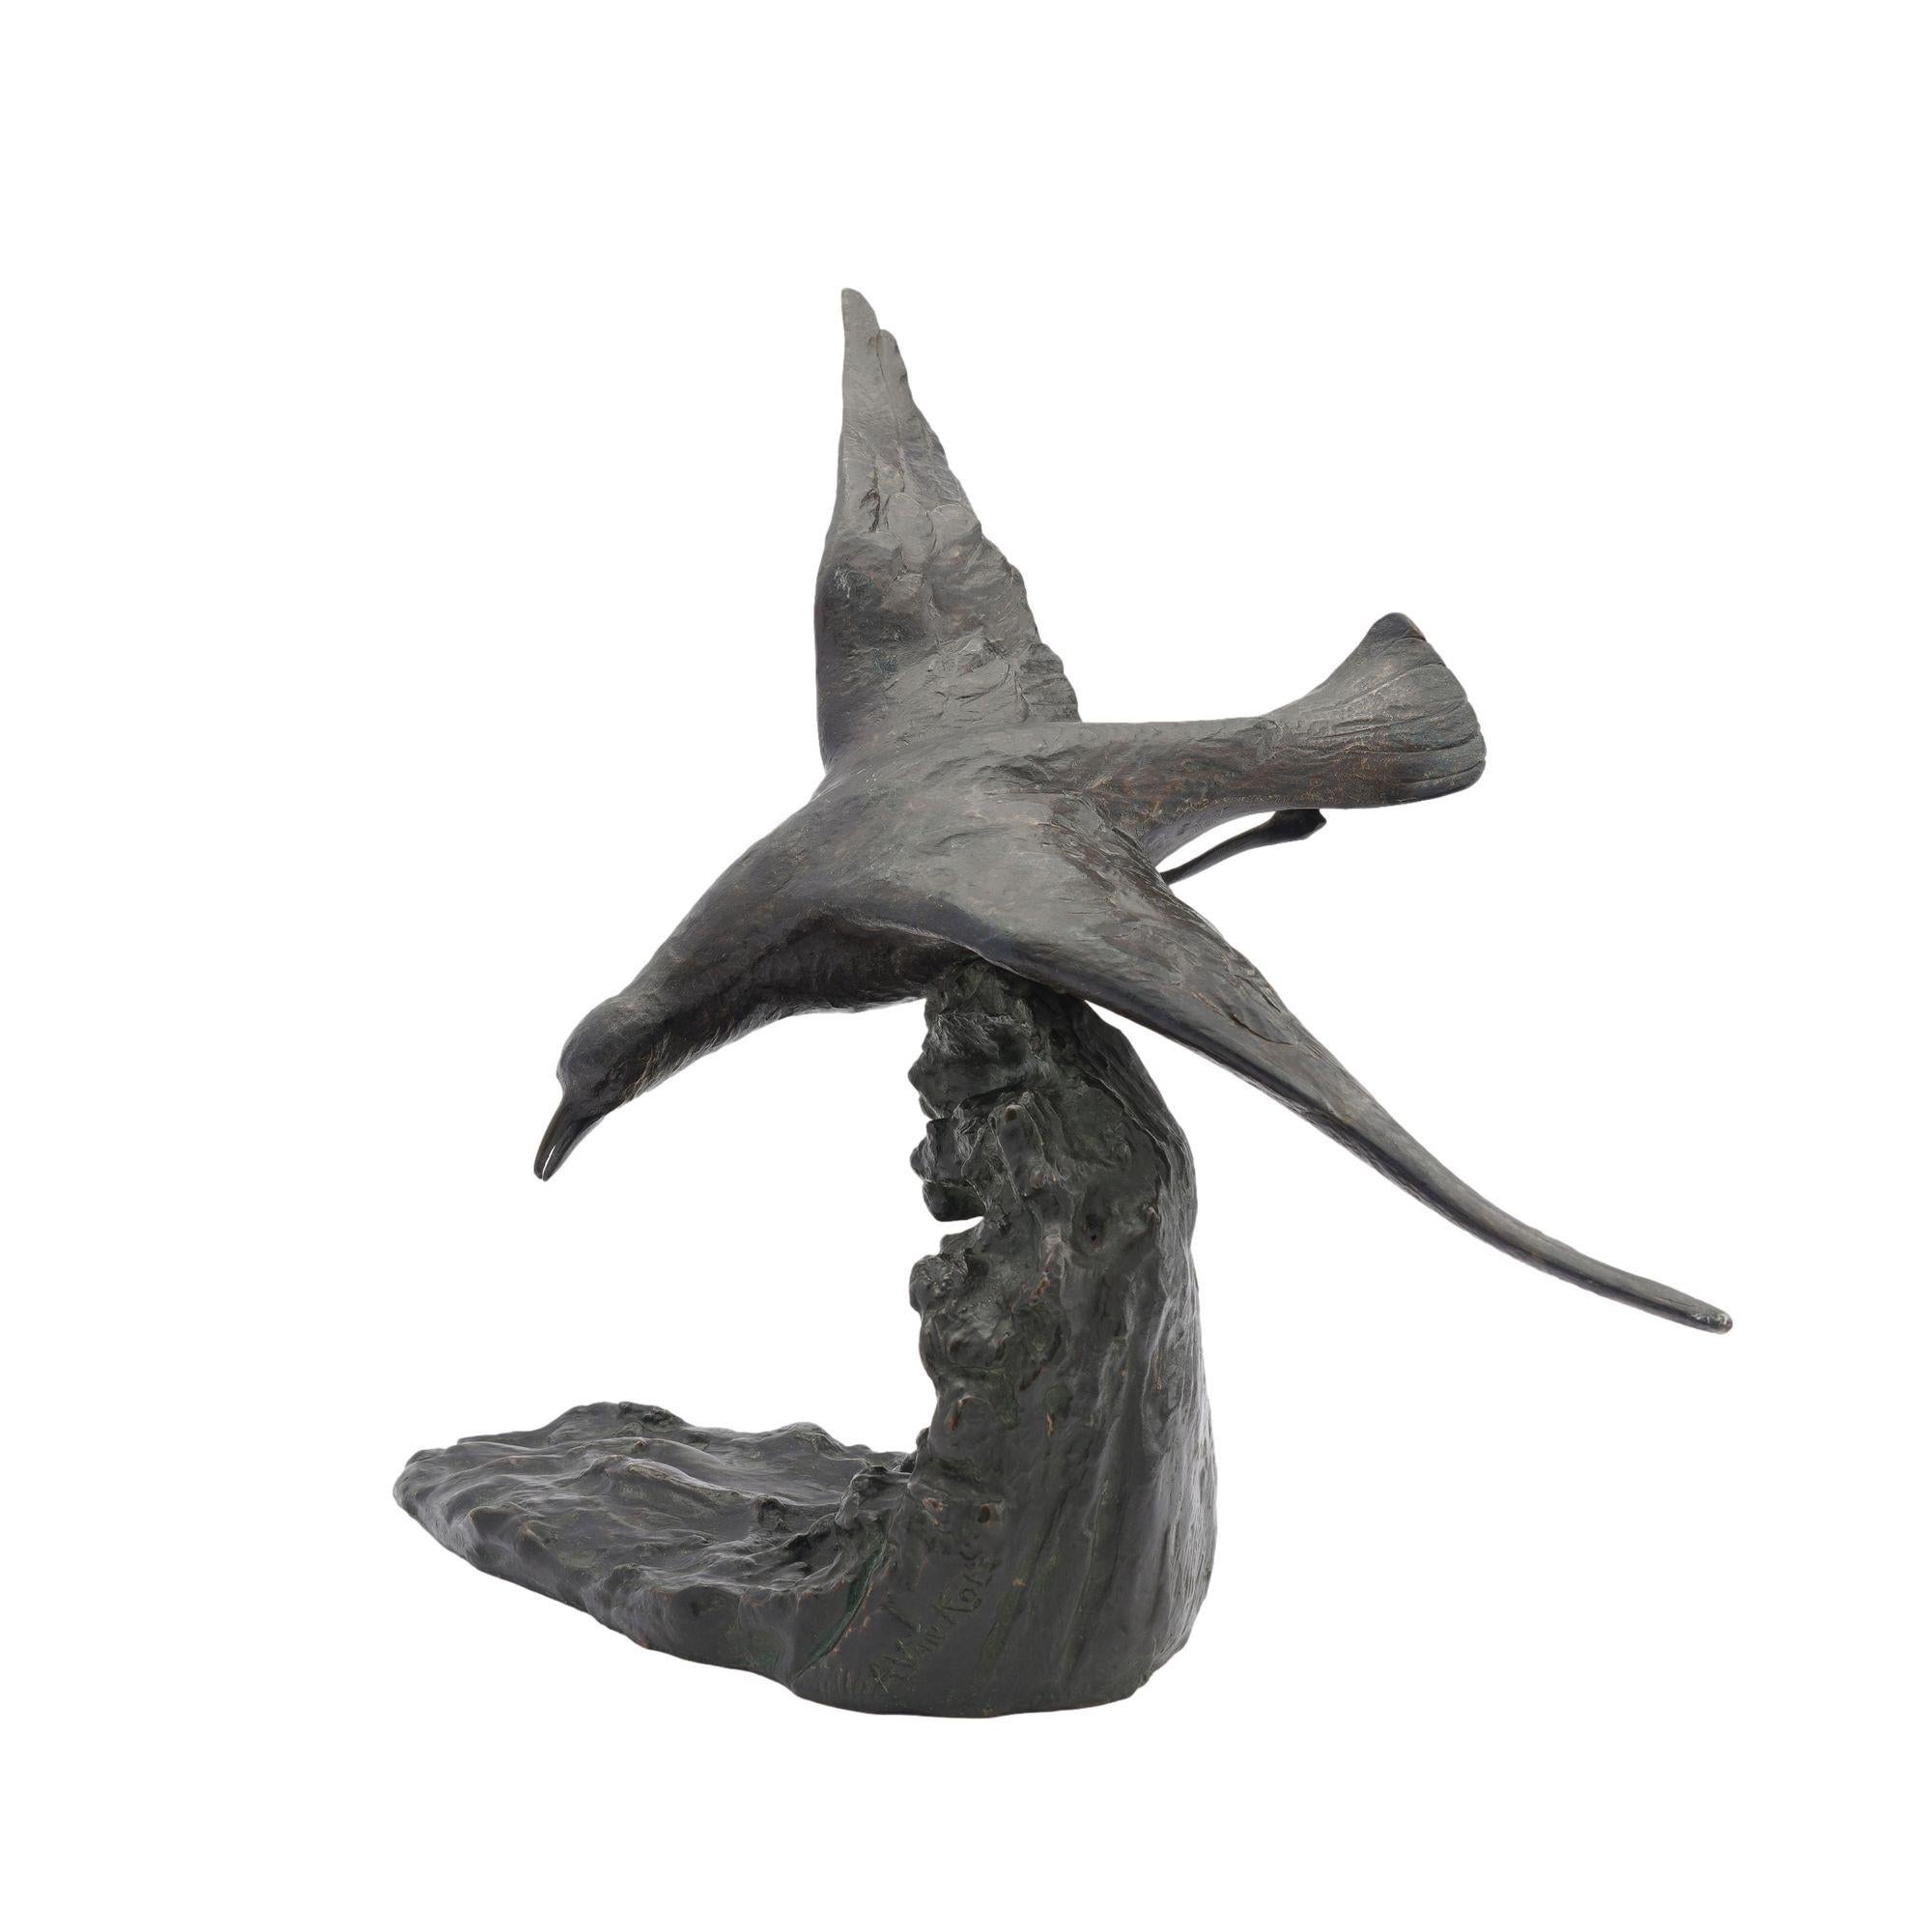 Art Deco cast bronze sculpture of a bird flying along the crest of a wave.
Signed on the base at the rear of the casting: Alvan Kote.